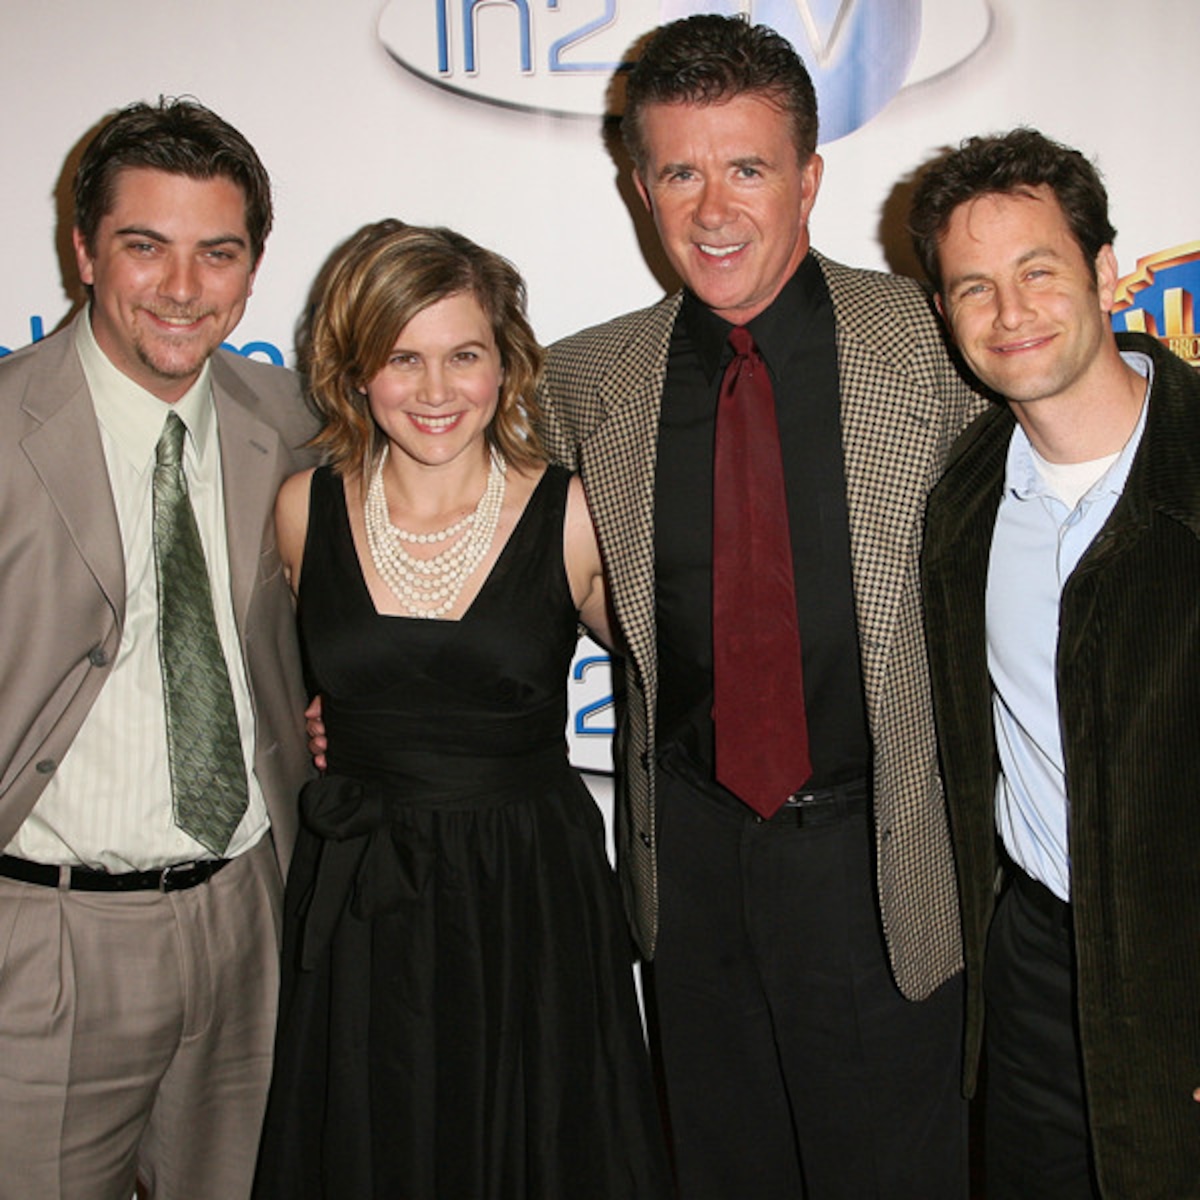 Kirk Cameron Remembers Alan Thicke And The Bond They Shared E Online